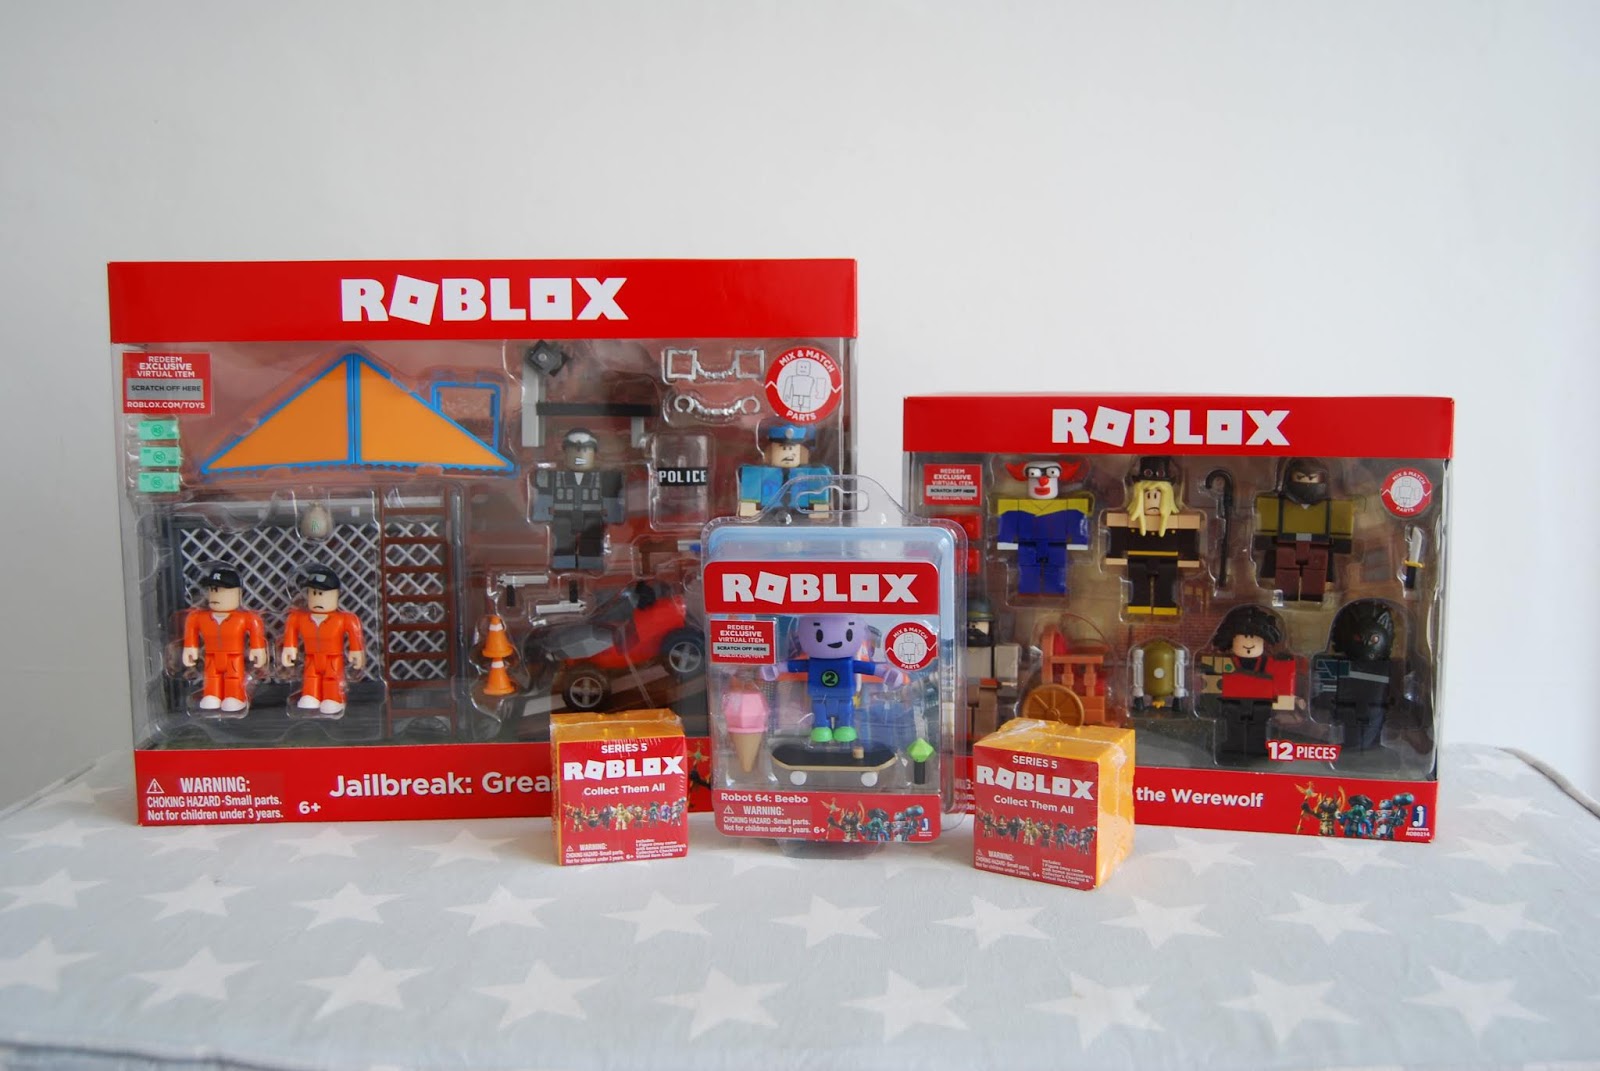 Chic Geek Diary Roblox Series 5 Toys Review Giveaway - roblox series 4 jailbreak inmate action figure mystery box